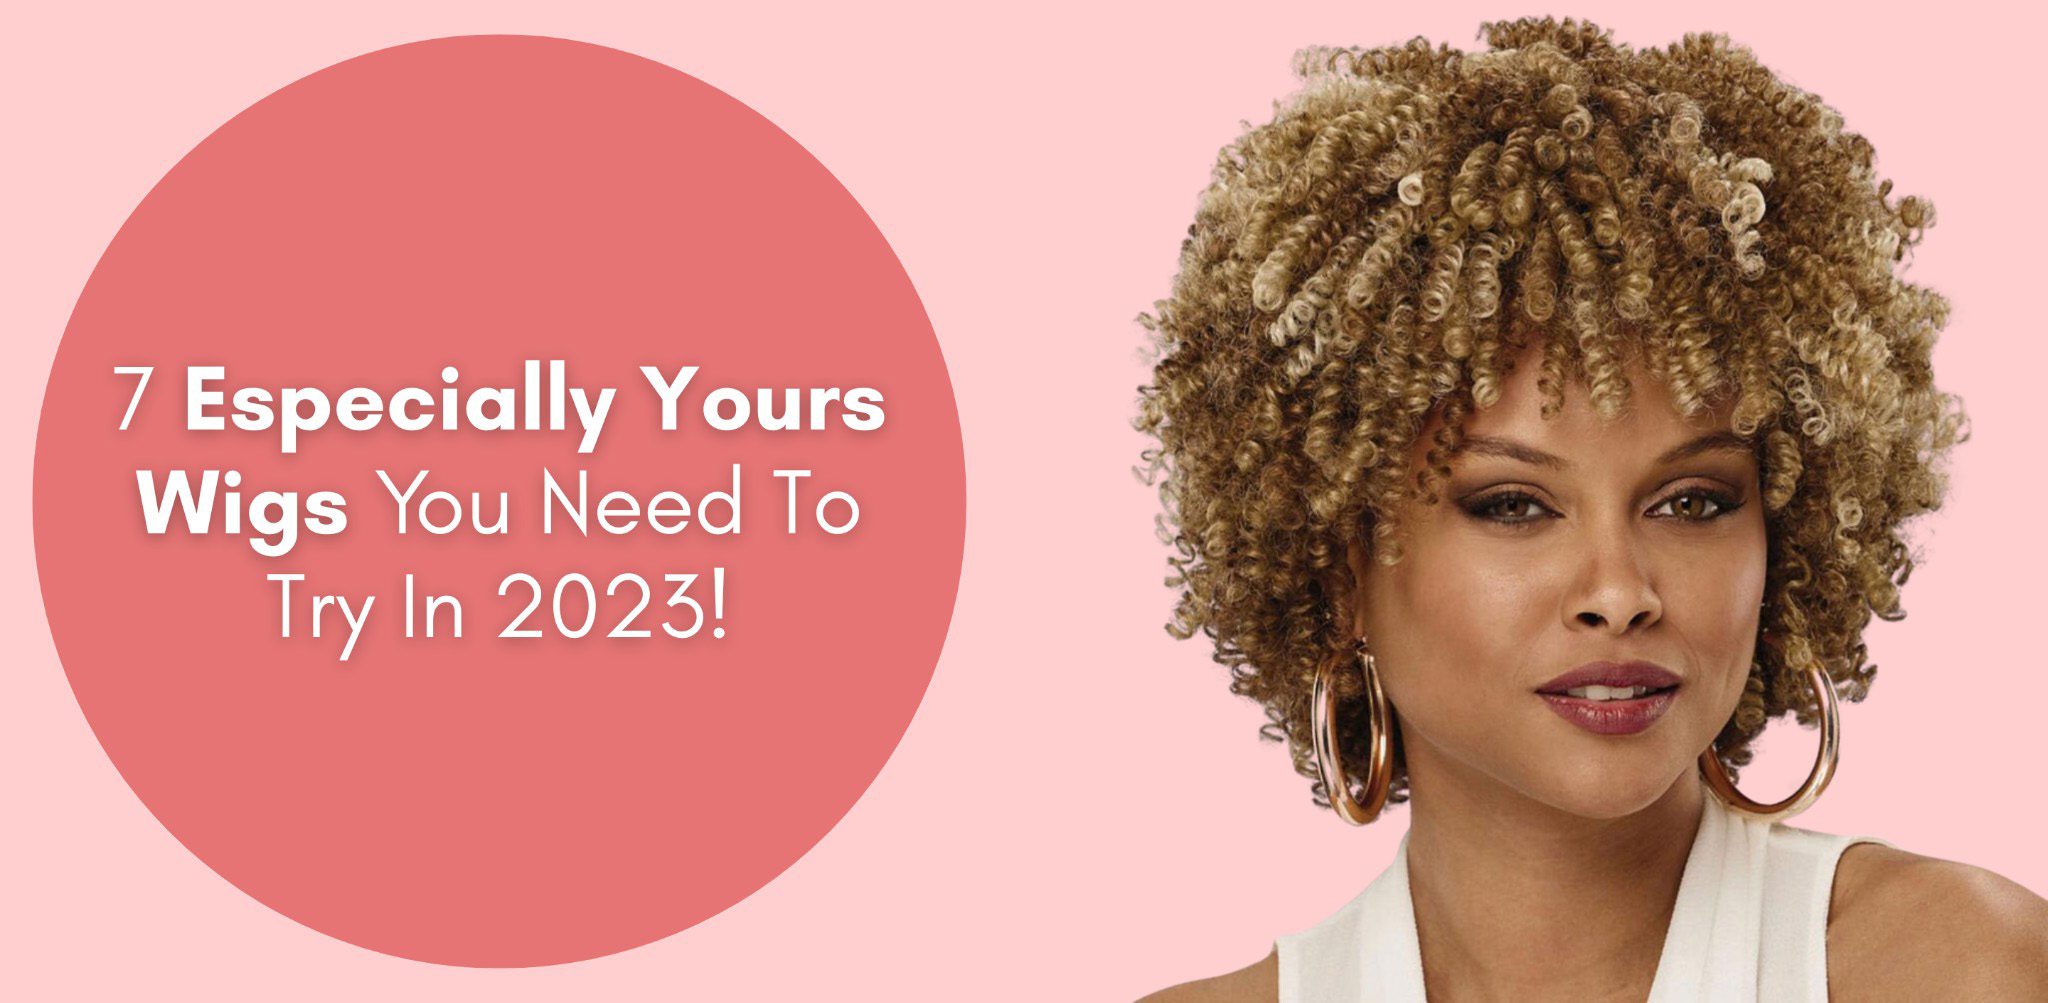 7 Especially Yours Wigs You Need To Try In 2023!